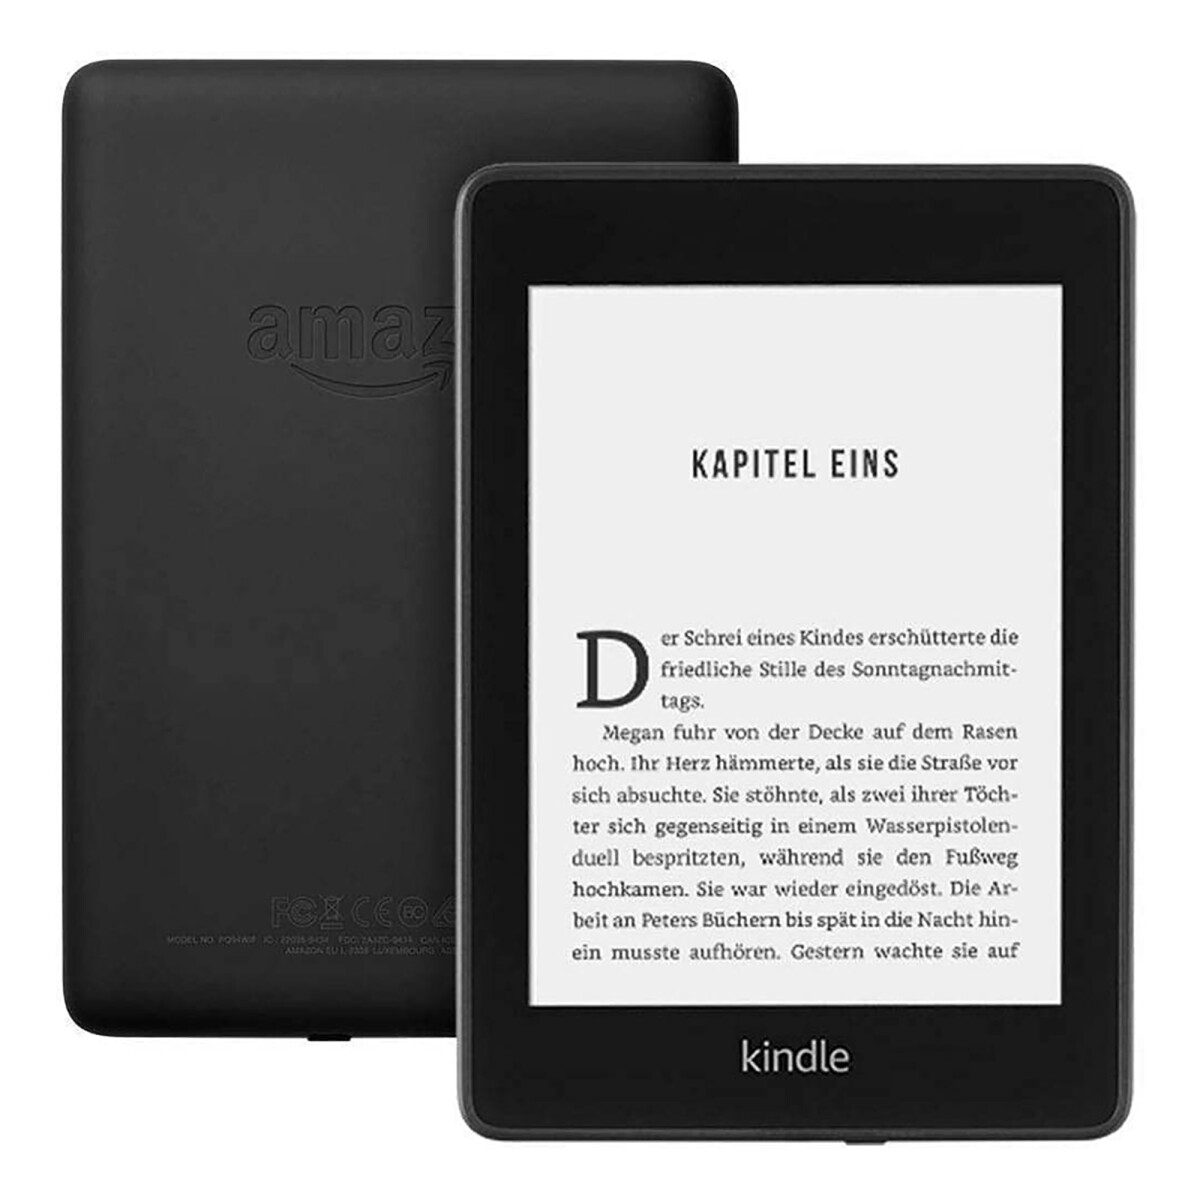 Amazon - E-reader Kindle Paperwhite (Gen 10) - IPX8. 6" Táctil. 300PPP. 8GB. Wifi. Bluetooth. Ref Aa - 001 